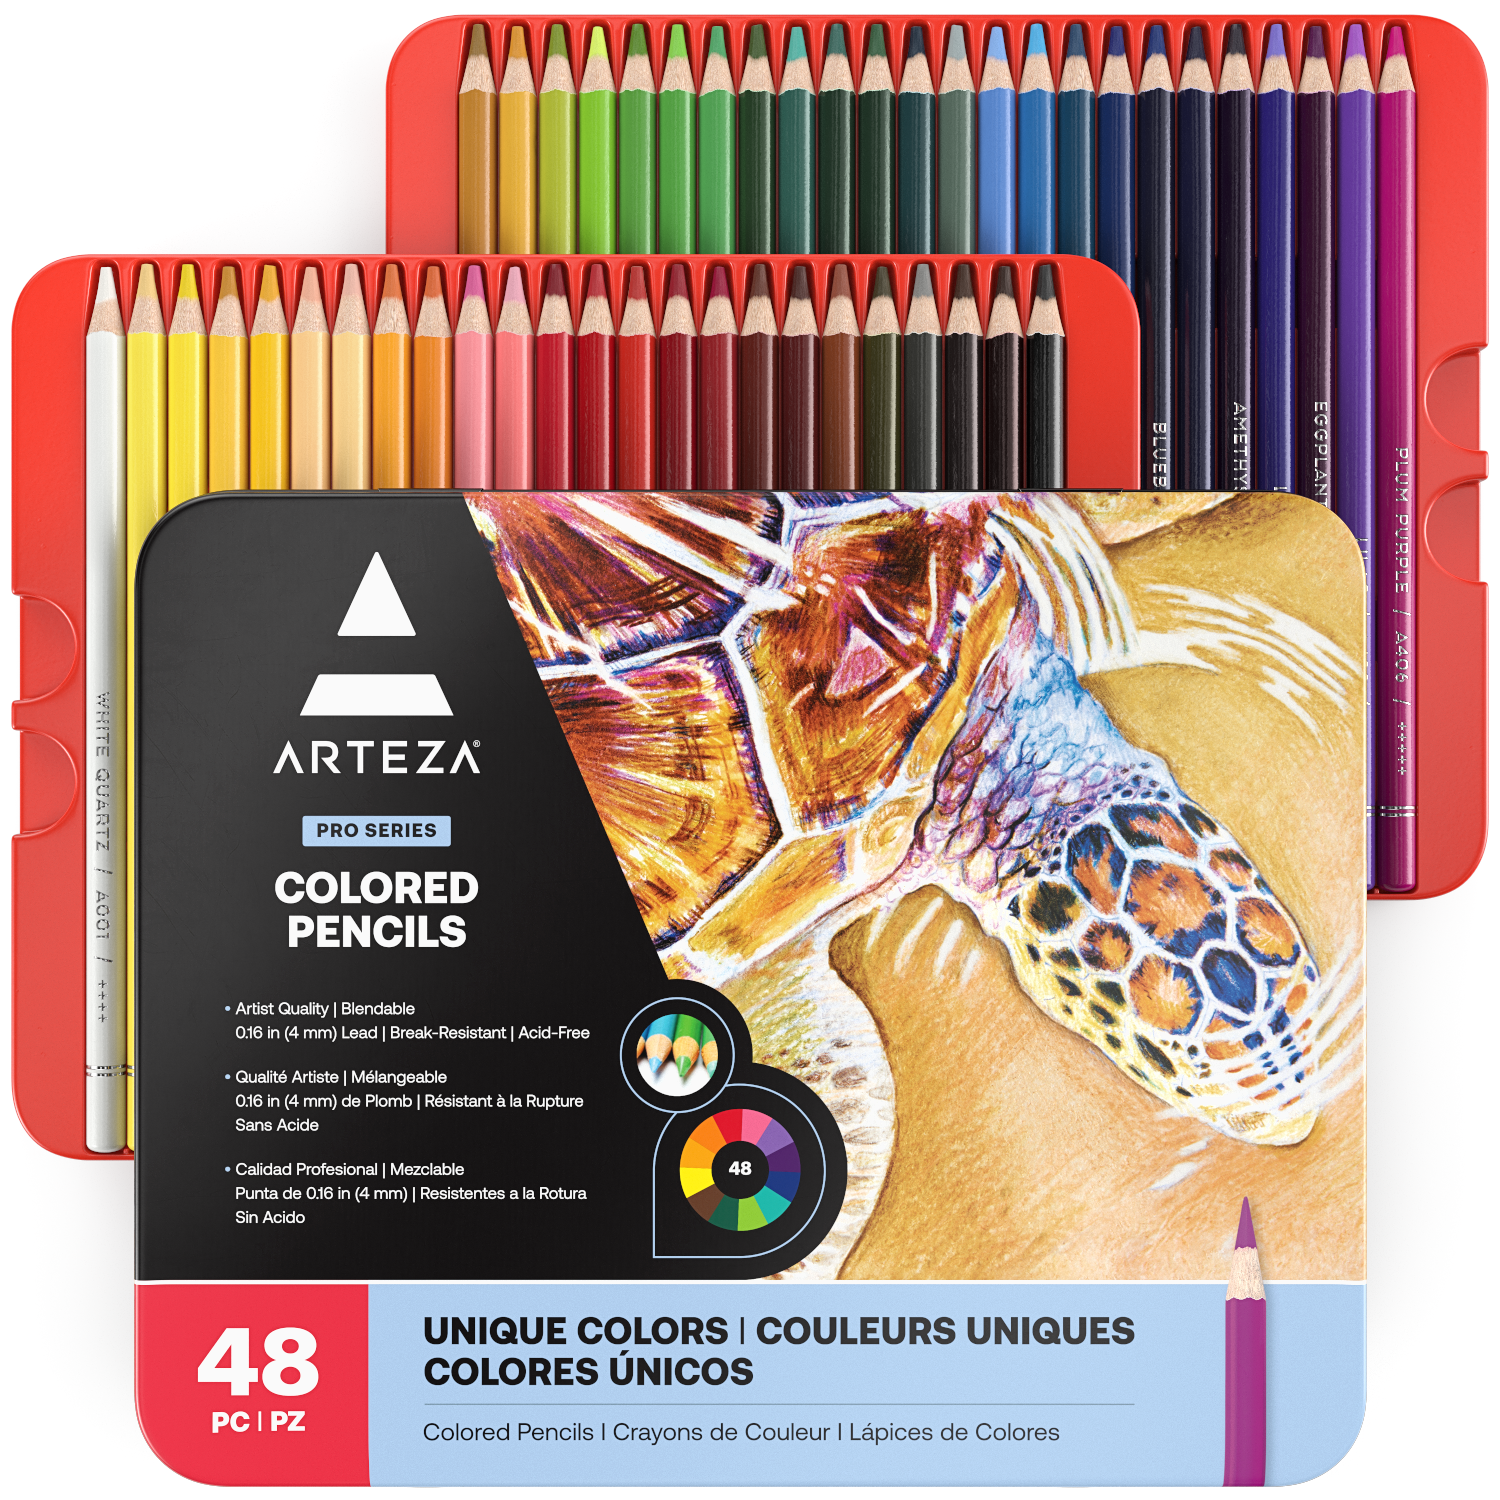 Top 5 Best Colored Pencils For Adult Coloring Books Latest In 2023